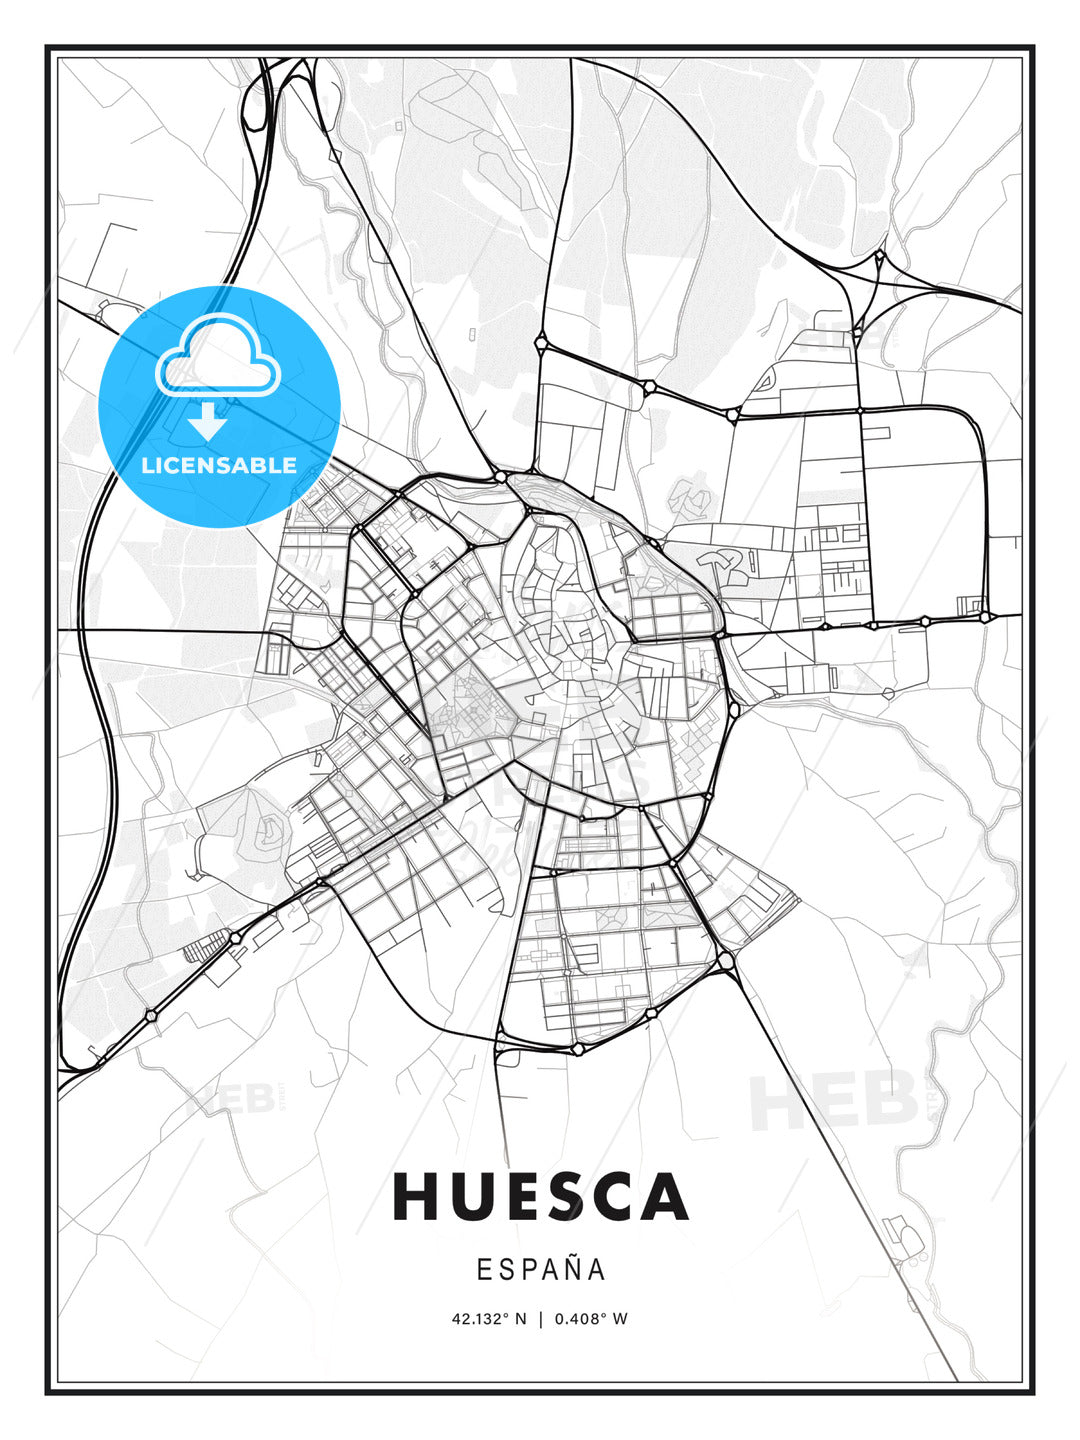 Huesca, Spain, Modern Print Template in Various Formats - HEBSTREITS Sketches